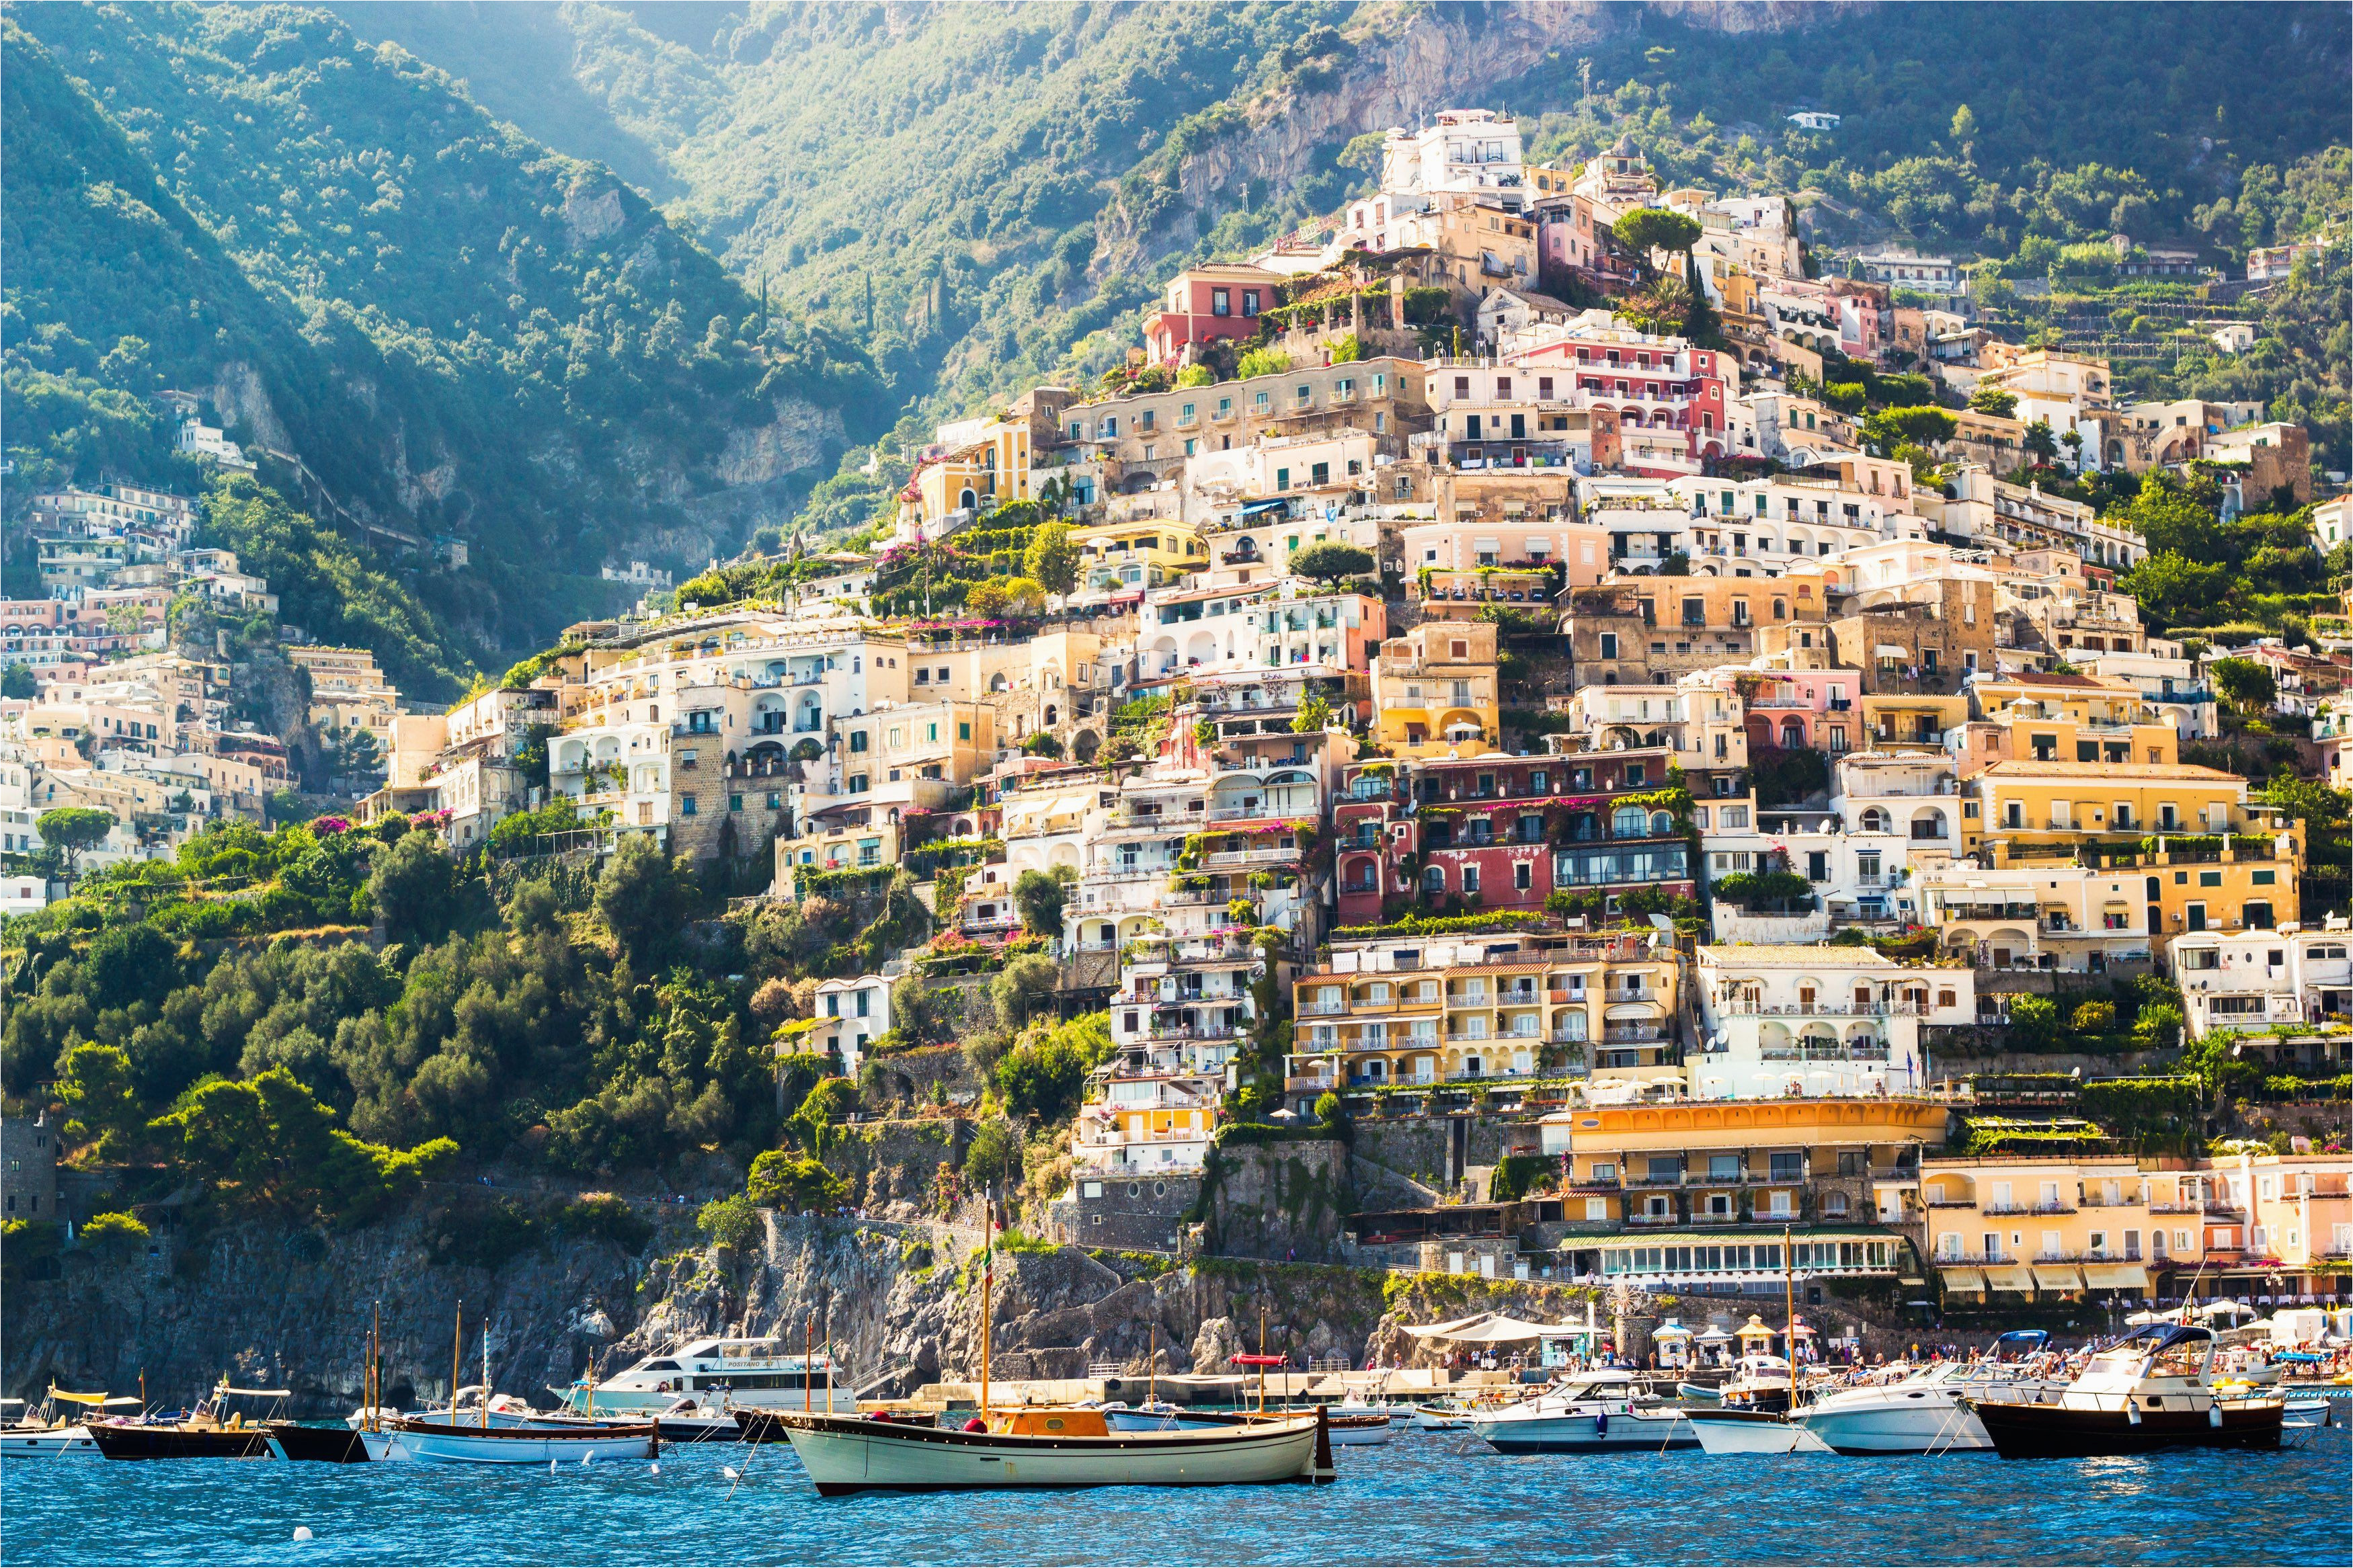 Map Of Positano Italy We Can T Get Over This Colorful View Of Positano Italy Travel